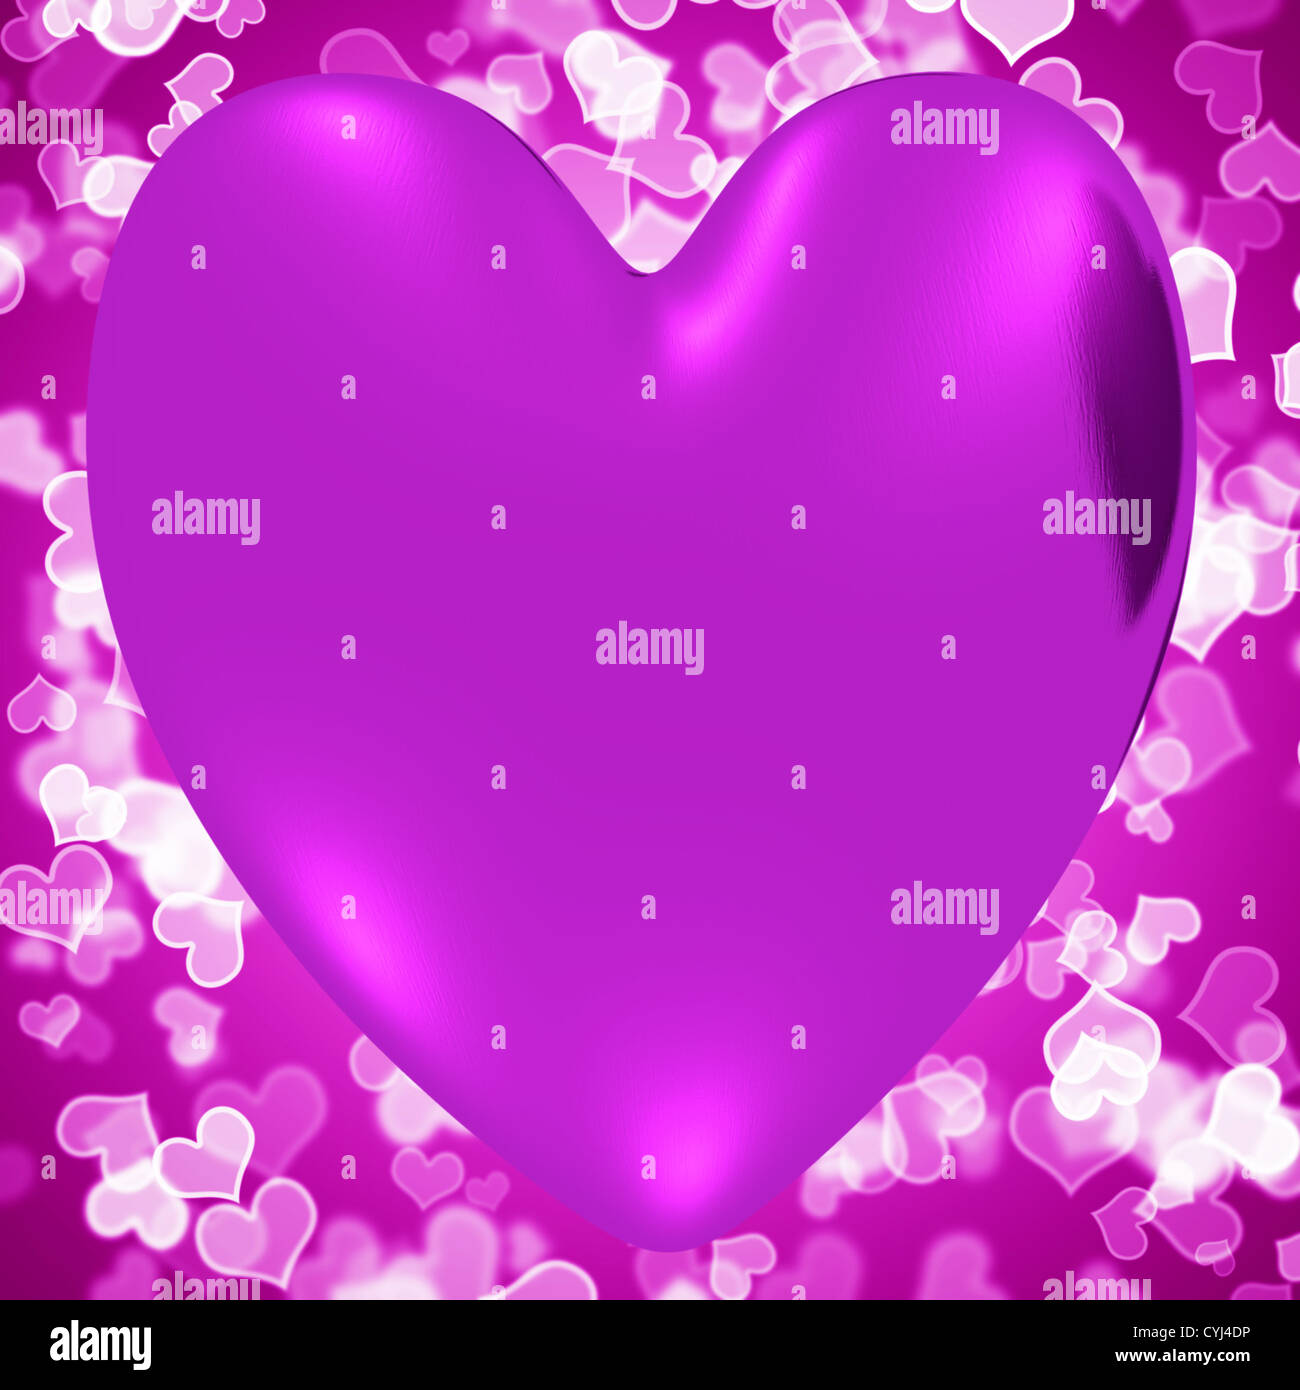 Heart With Mauve Hearts Background Shows Loving And Romance Stock Photo